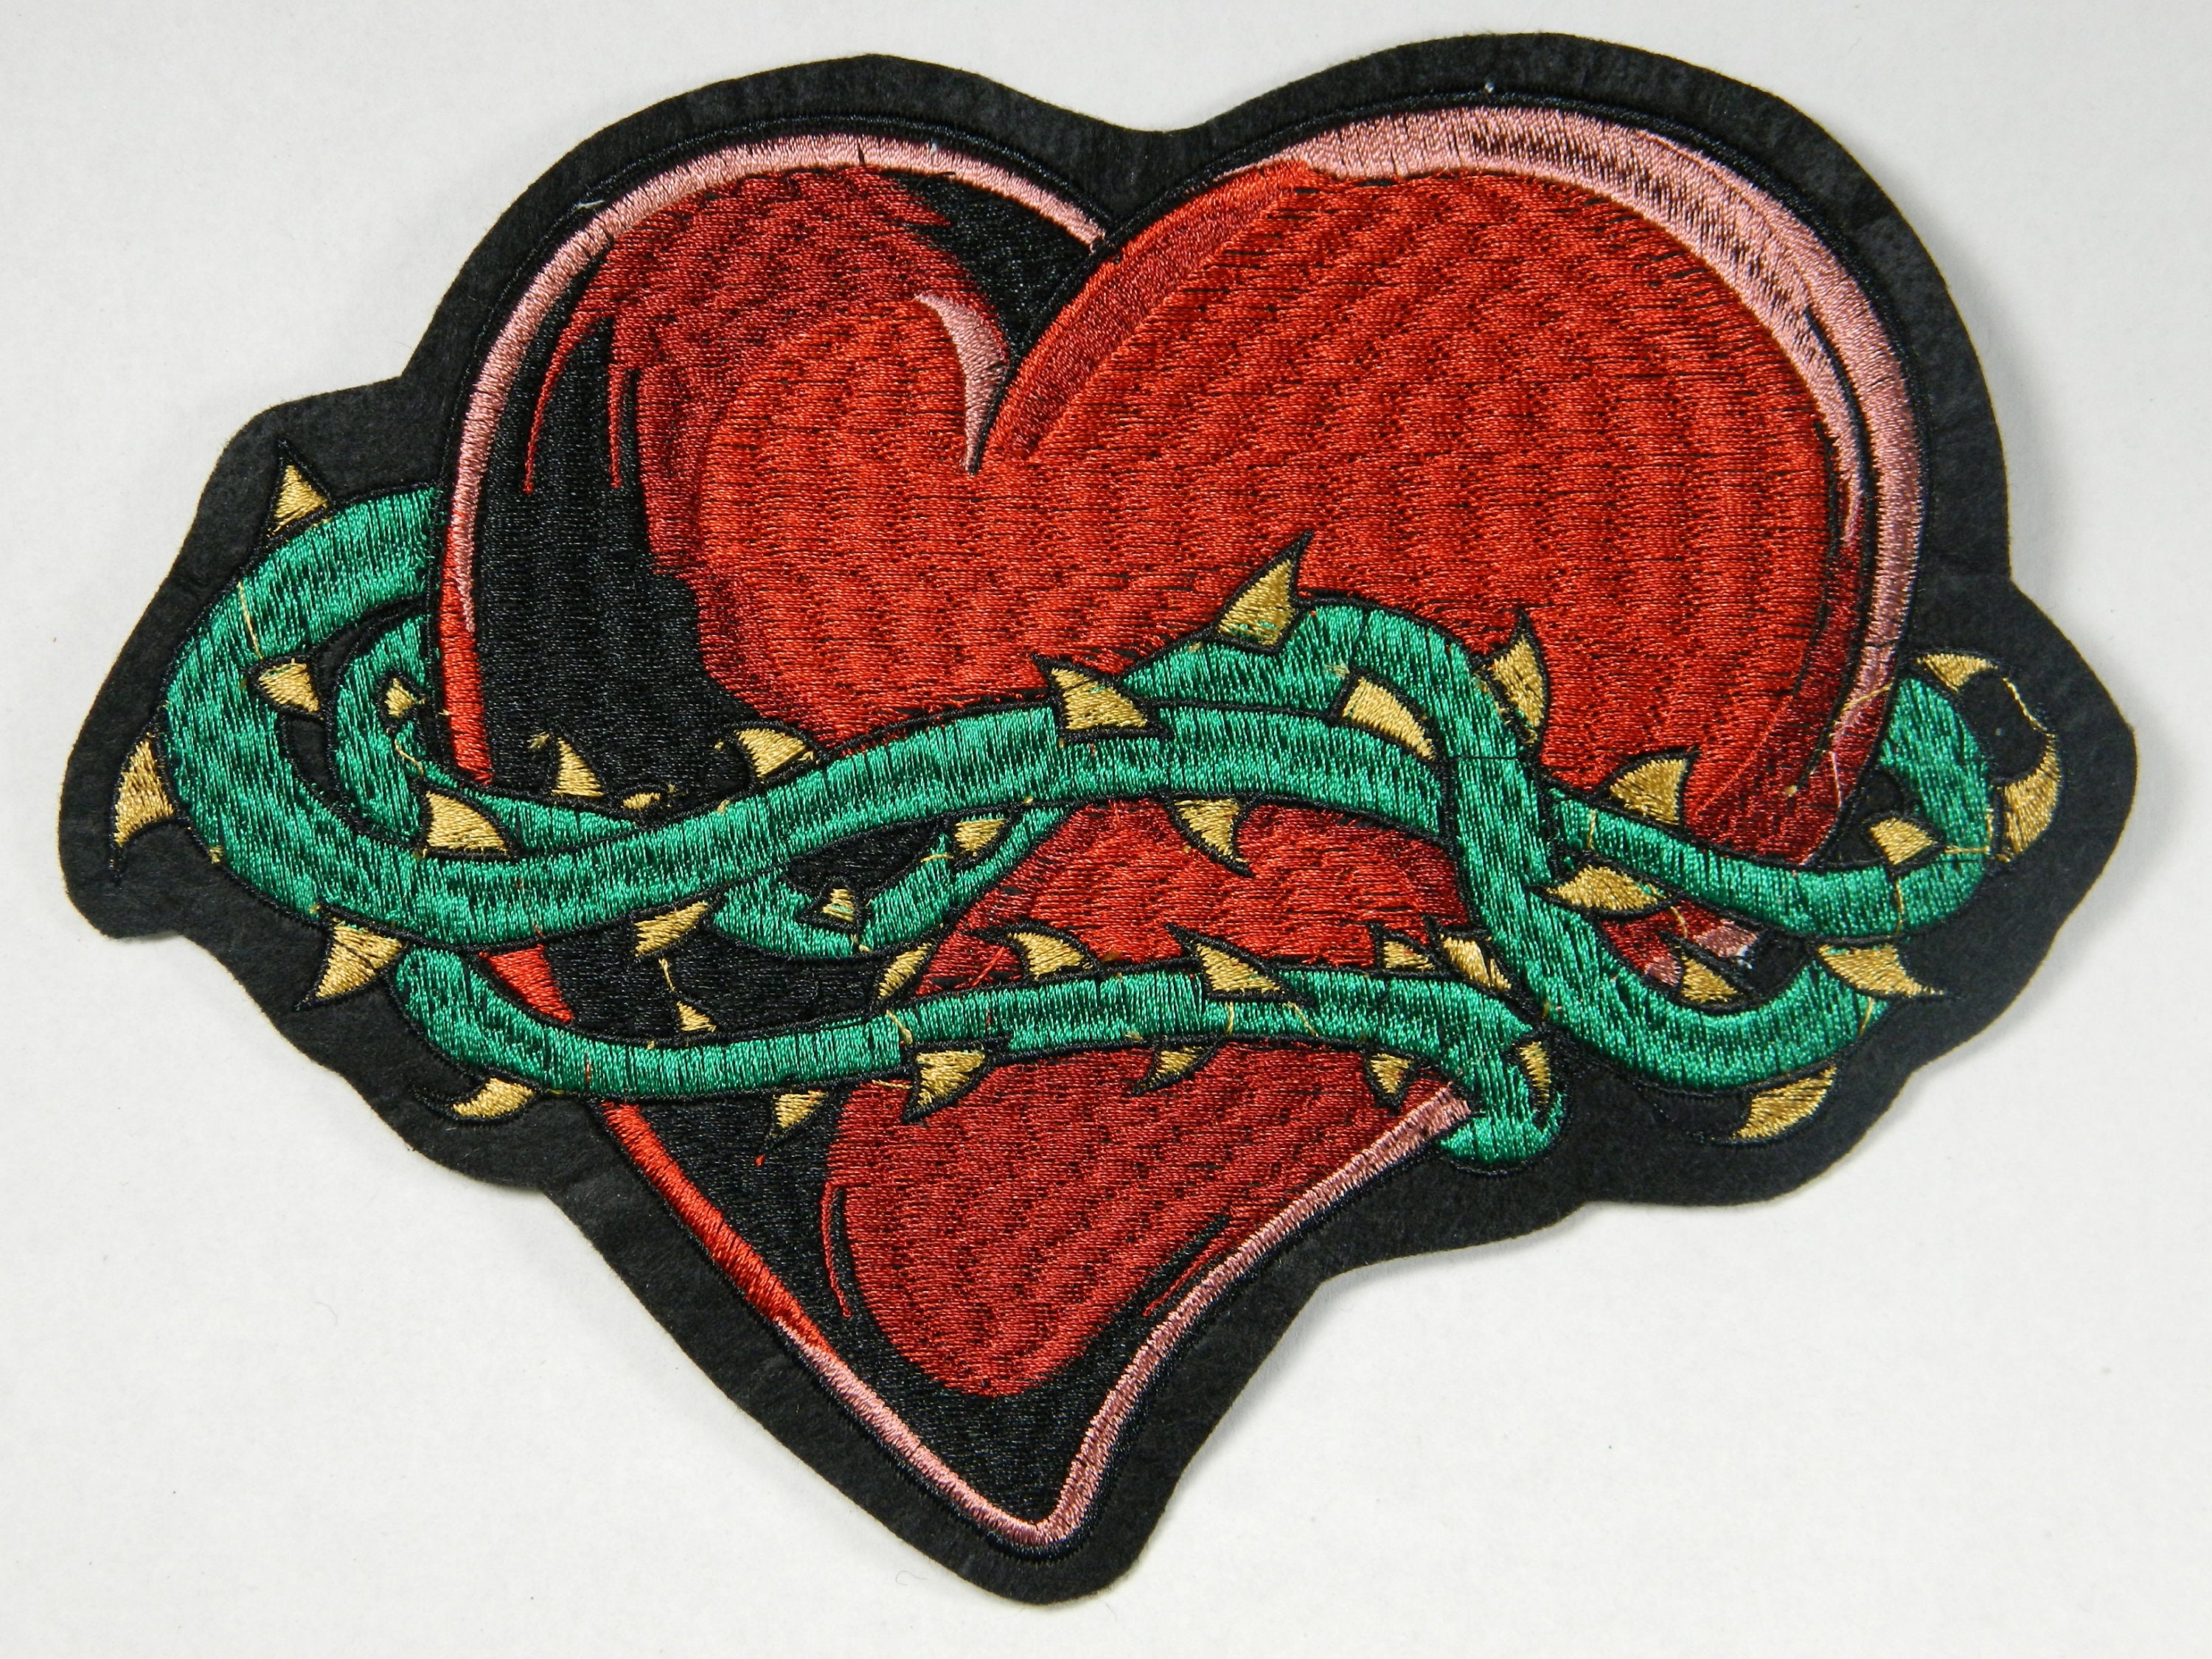 18 Pcs Valentine's Day Heart Iron on Patch Heart Shape Iron on Patches Red  Clothing Heart Patch Craft Custom Embroidered Repair Cute Sew Patches